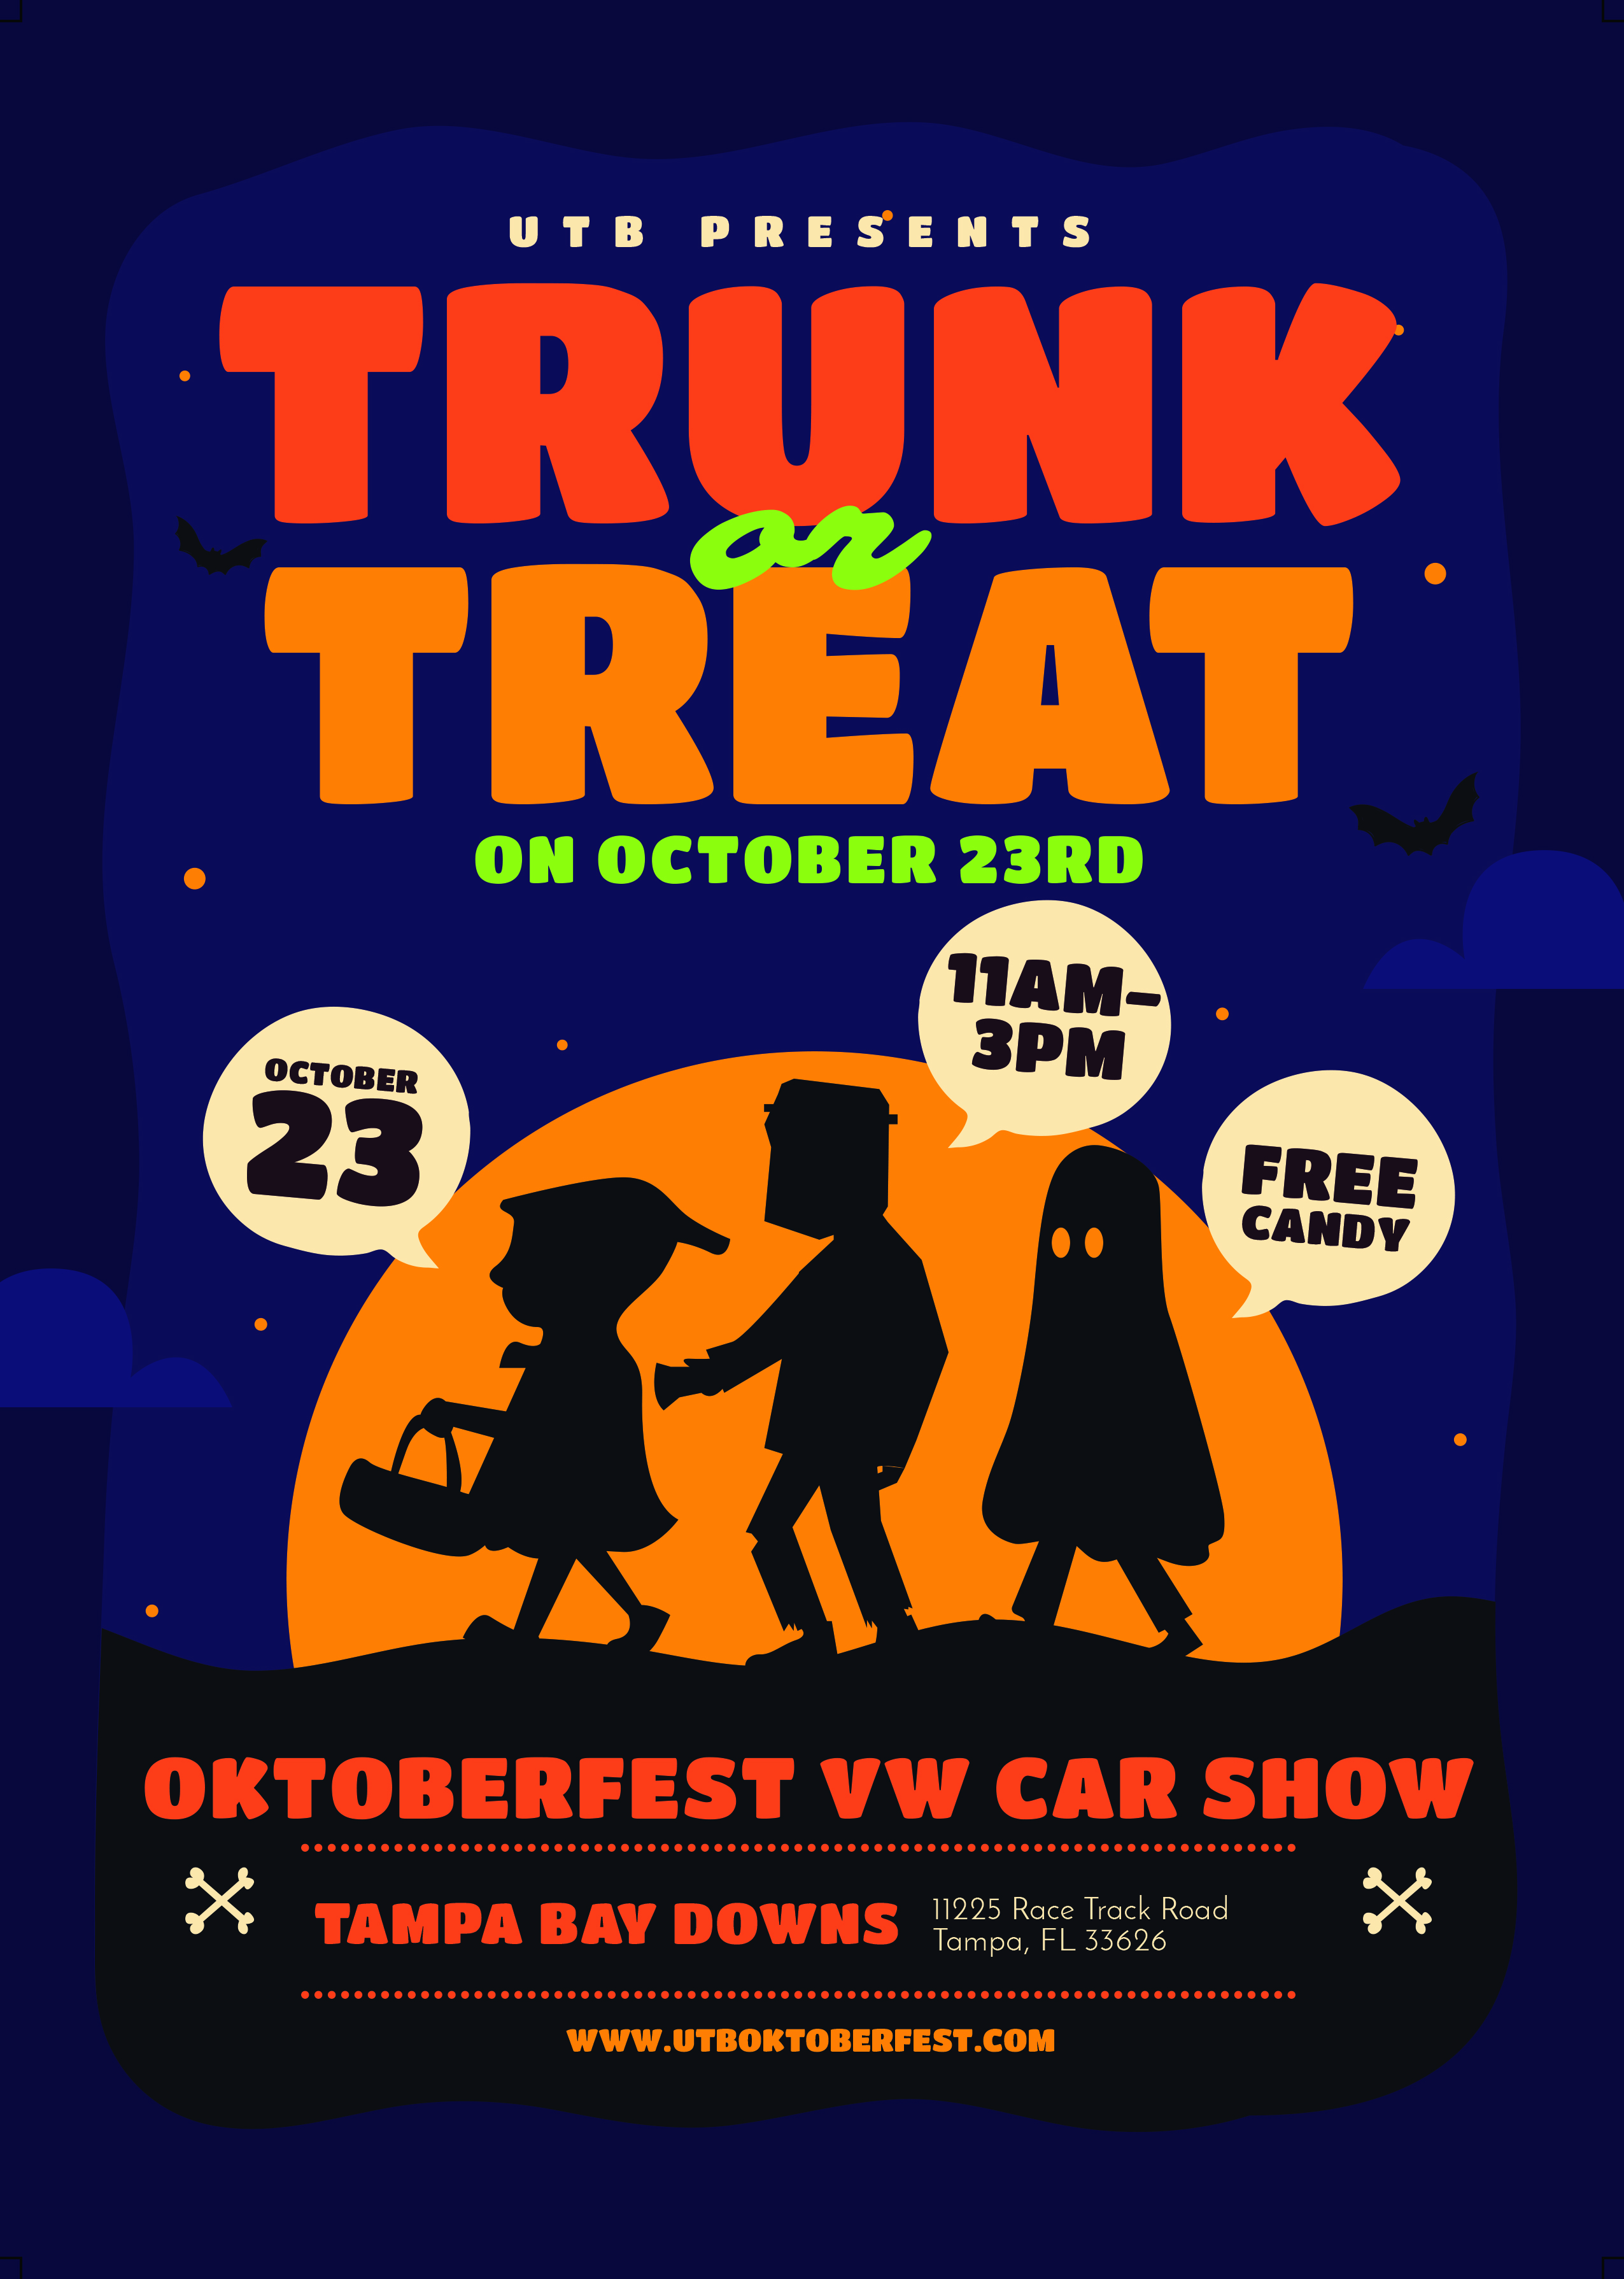 Event Flyer for Trunk or Treat